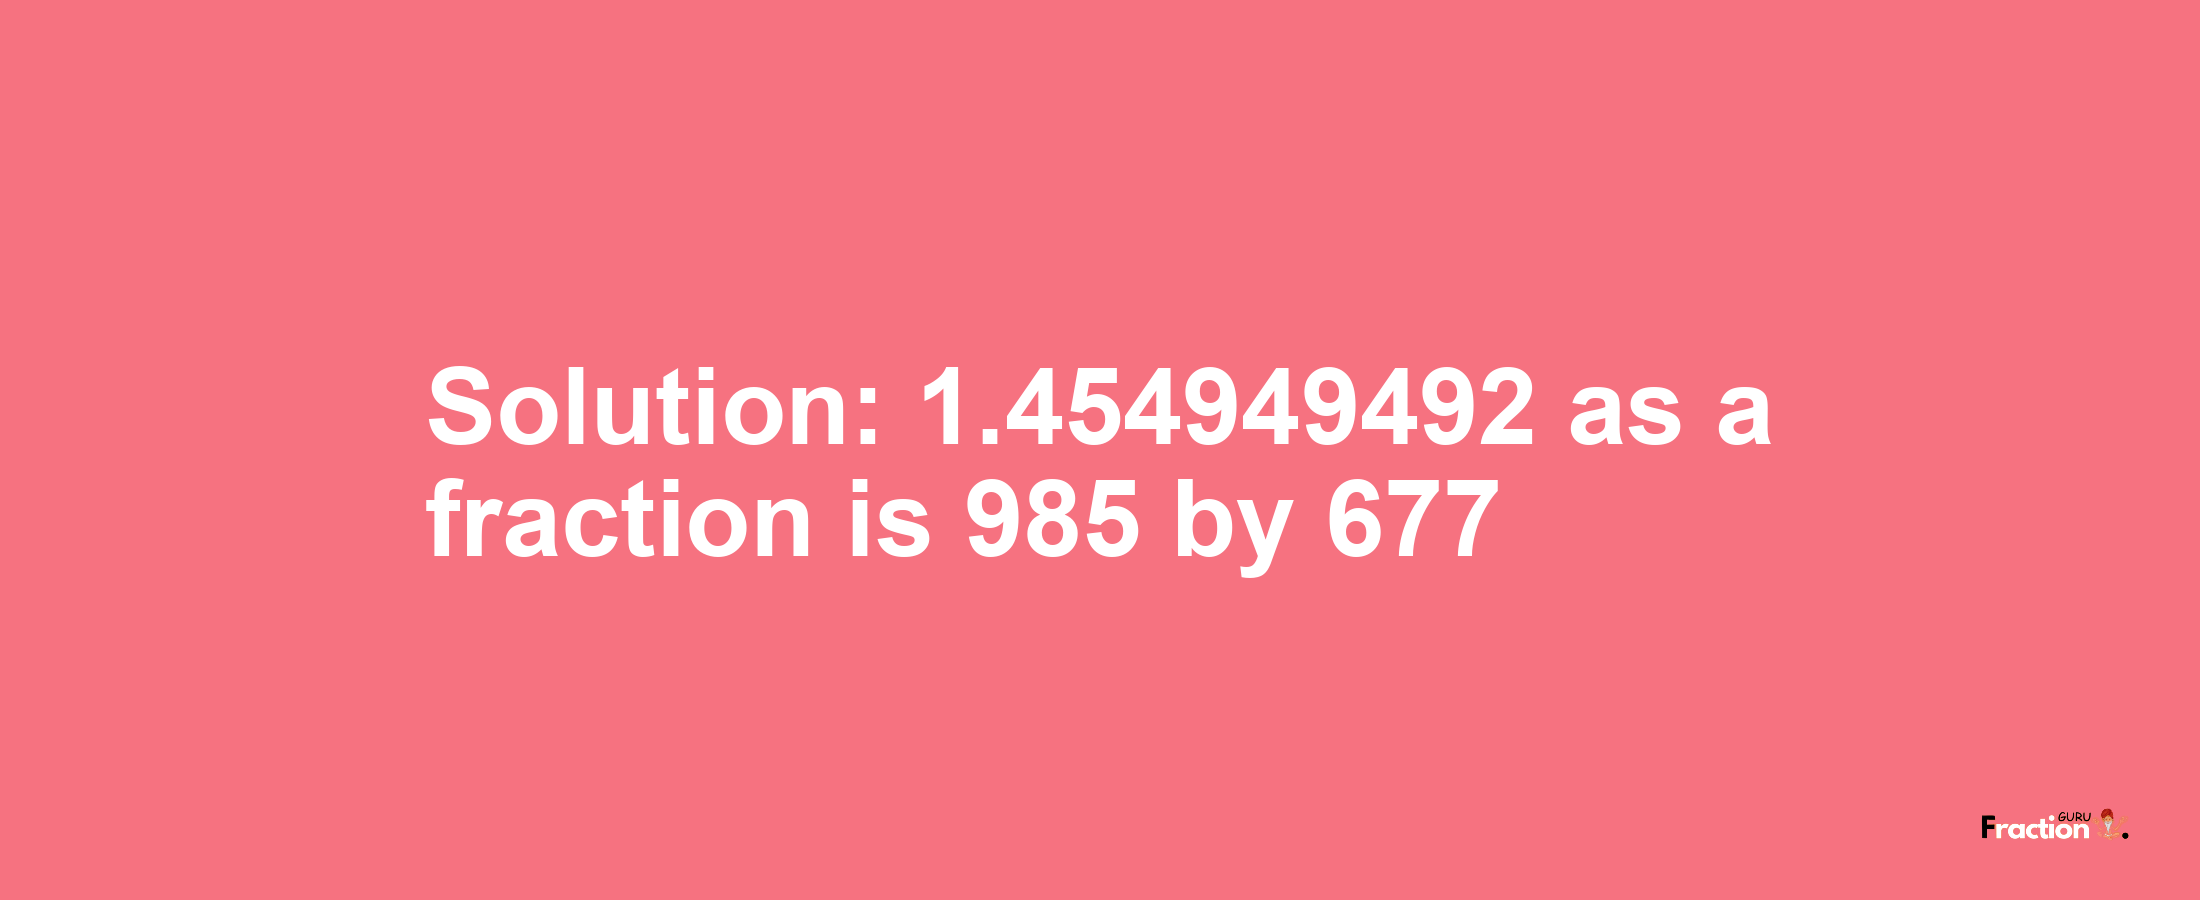 Solution:1.454949492 as a fraction is 985/677